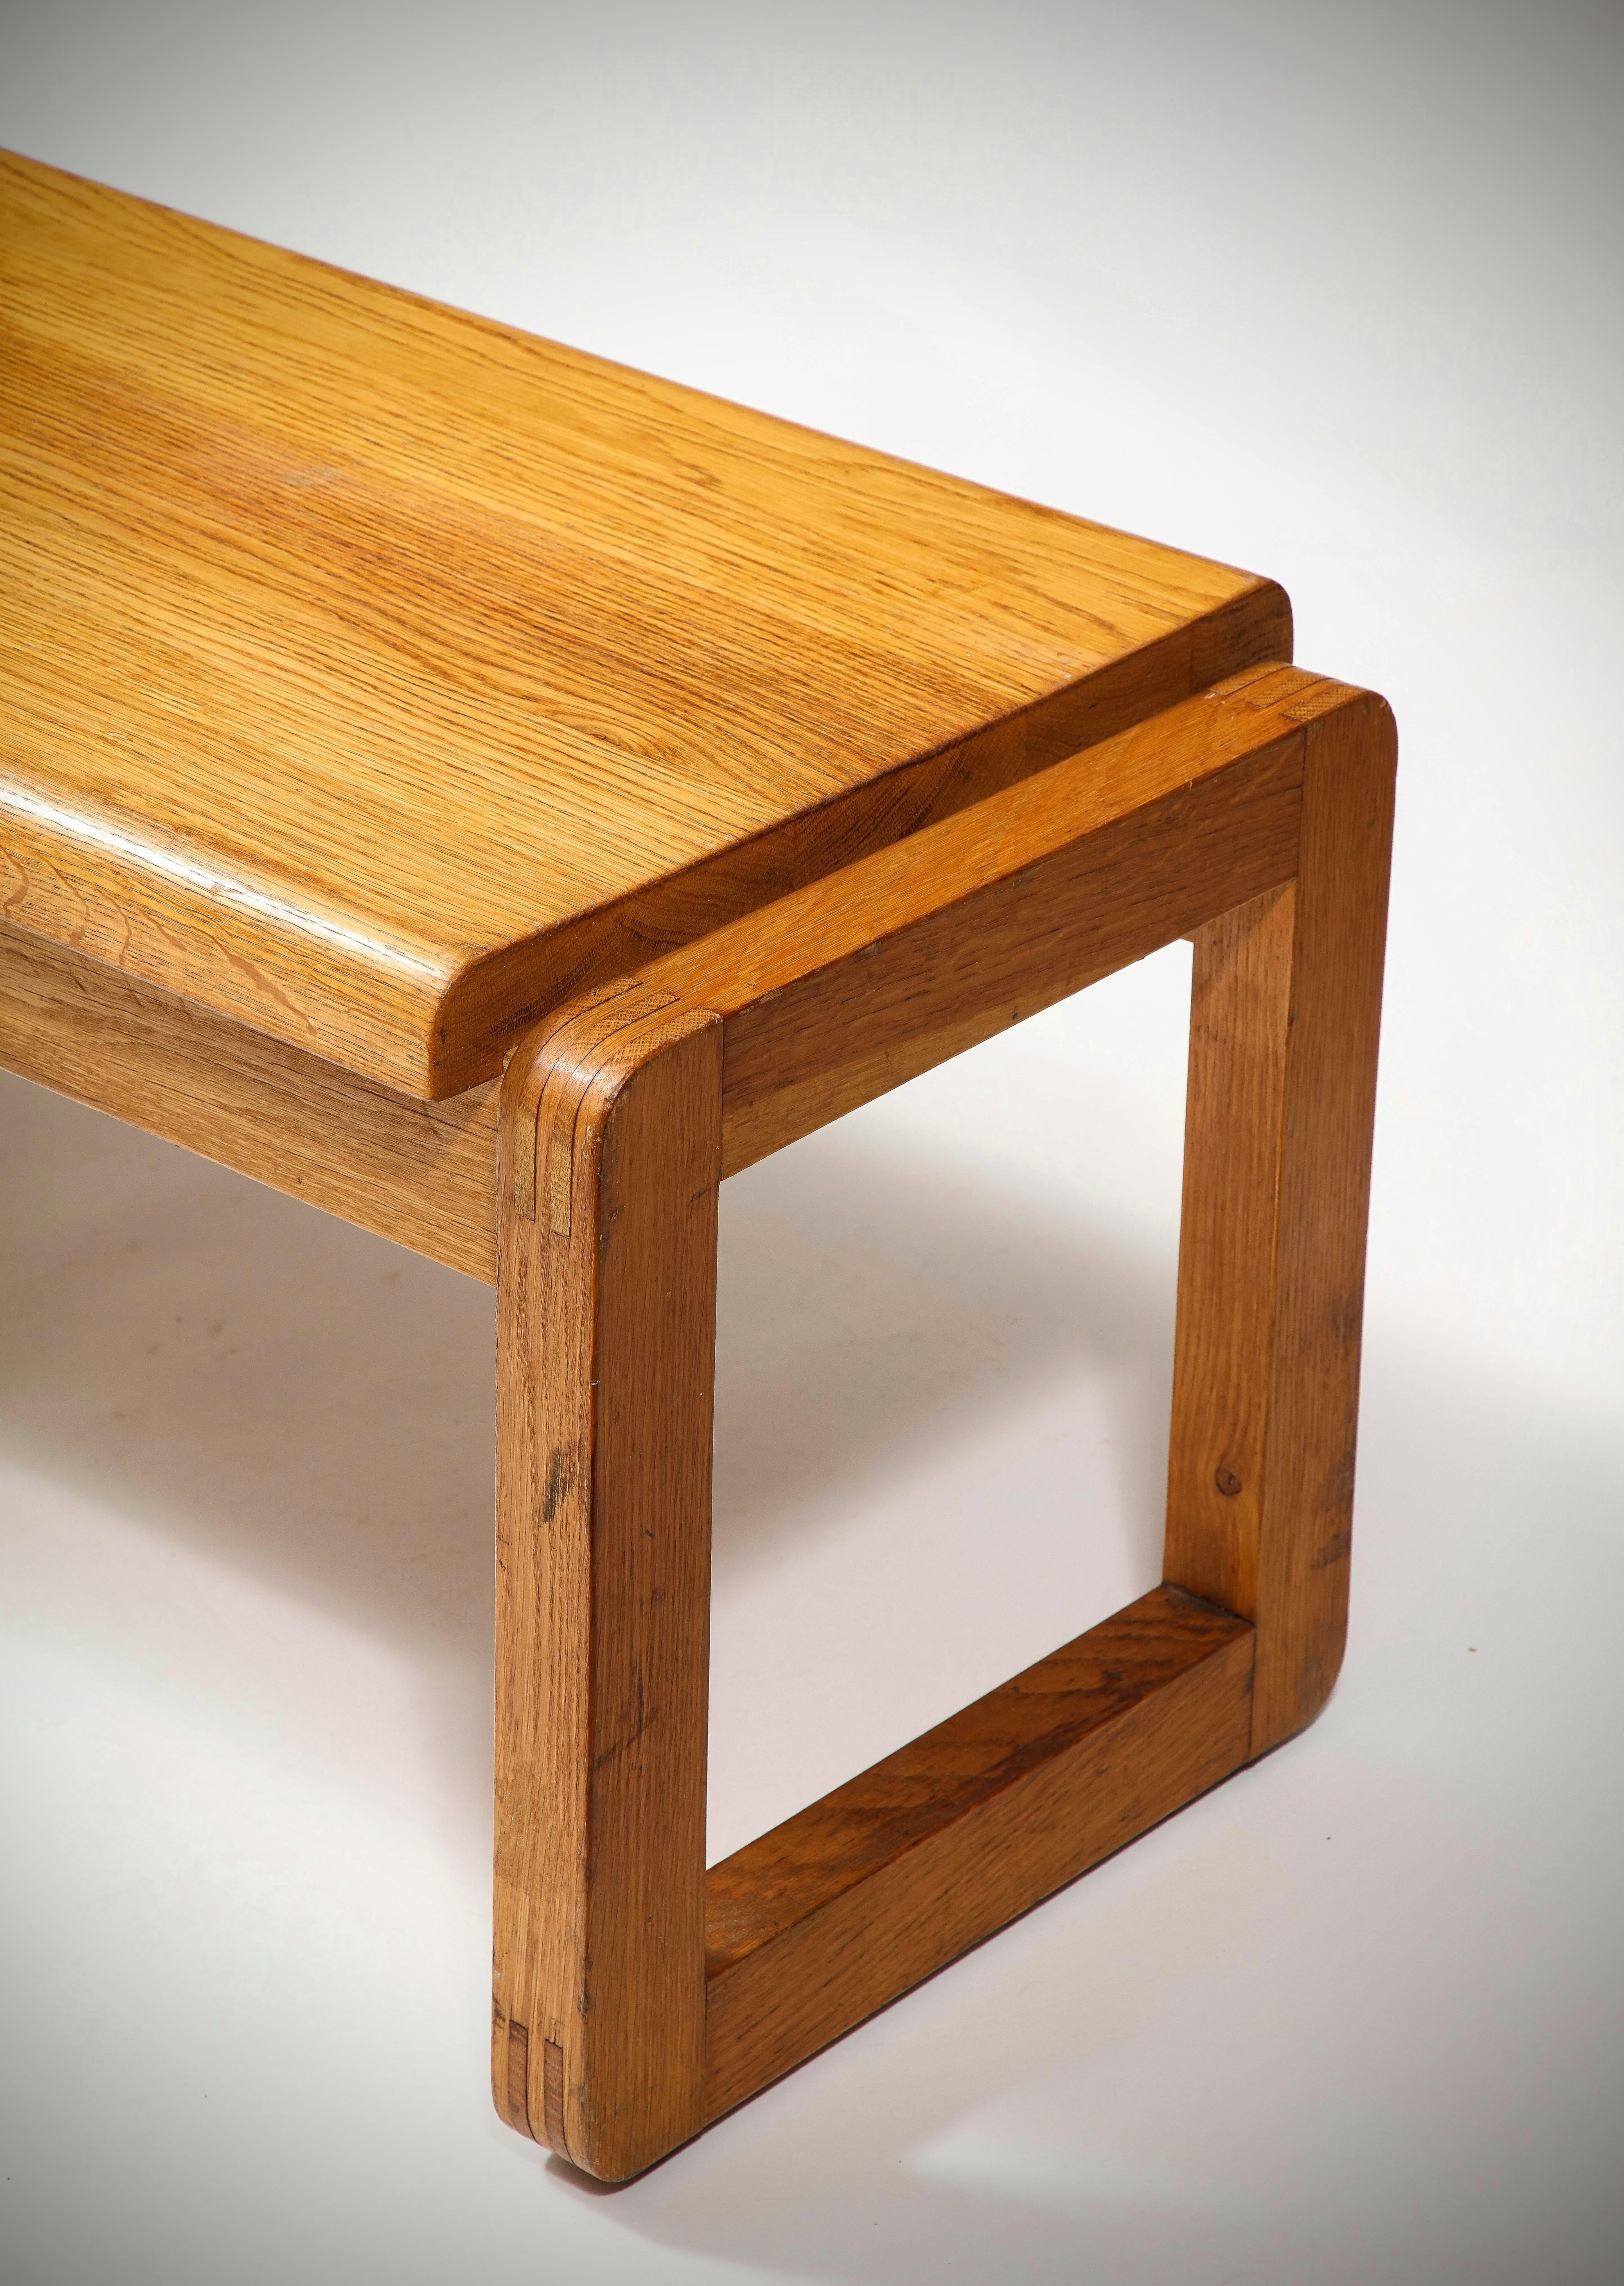 Minimalist Solid Oak Bench in style of Guillerme & Chambron  - Netherlands 1970s For Sale 5